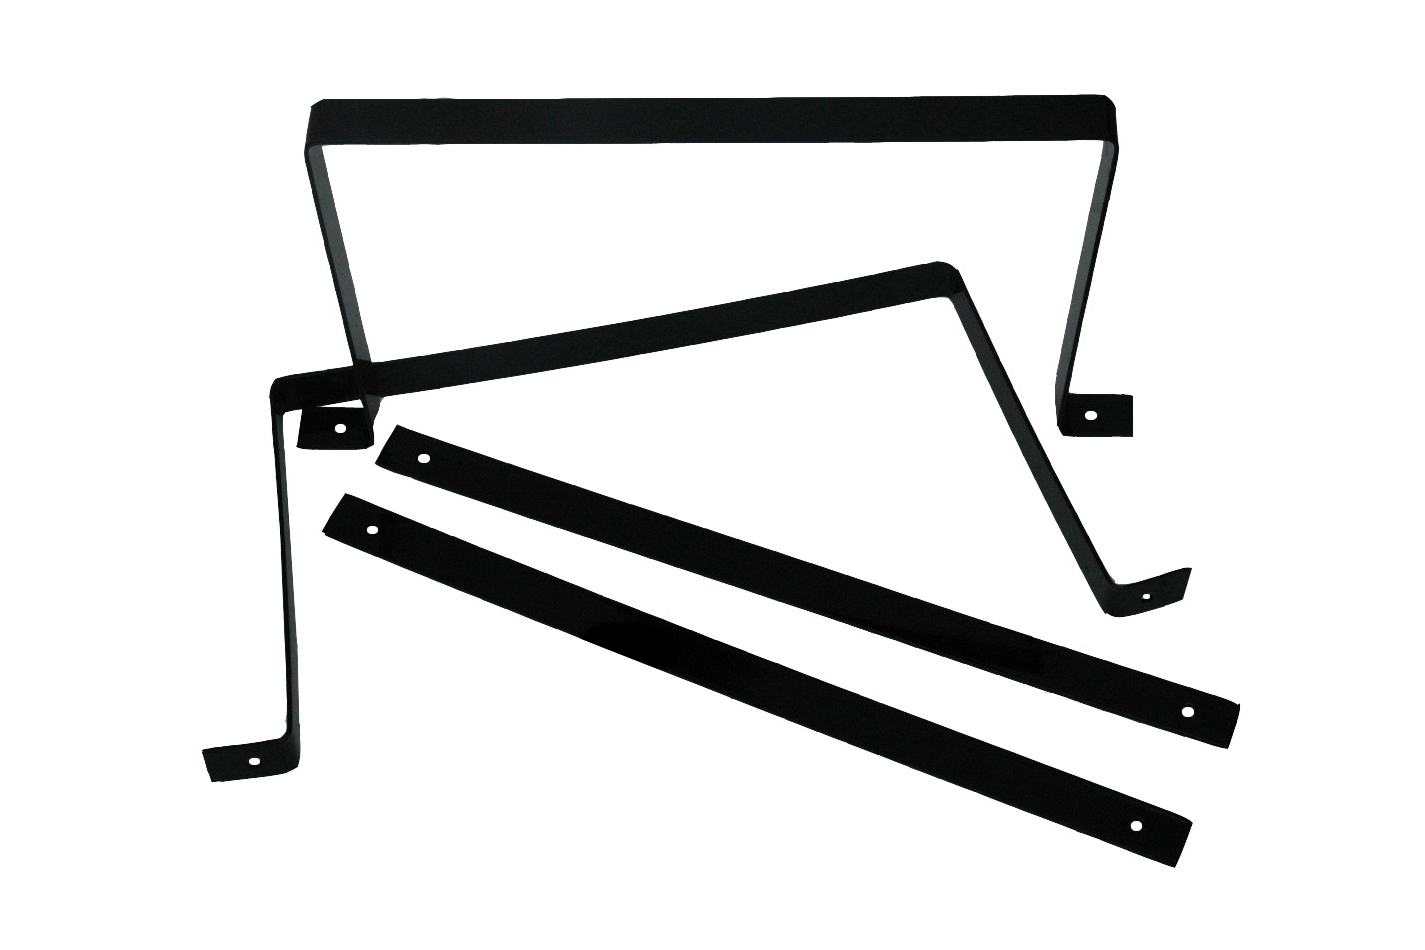 RCI 7519A - Fuel Cell Mounting Strap, 17 in Wide x 10 in Tall, Steel, Black Primer, RCI 2120 Series 12 Gallon Fuel Cells, Kit